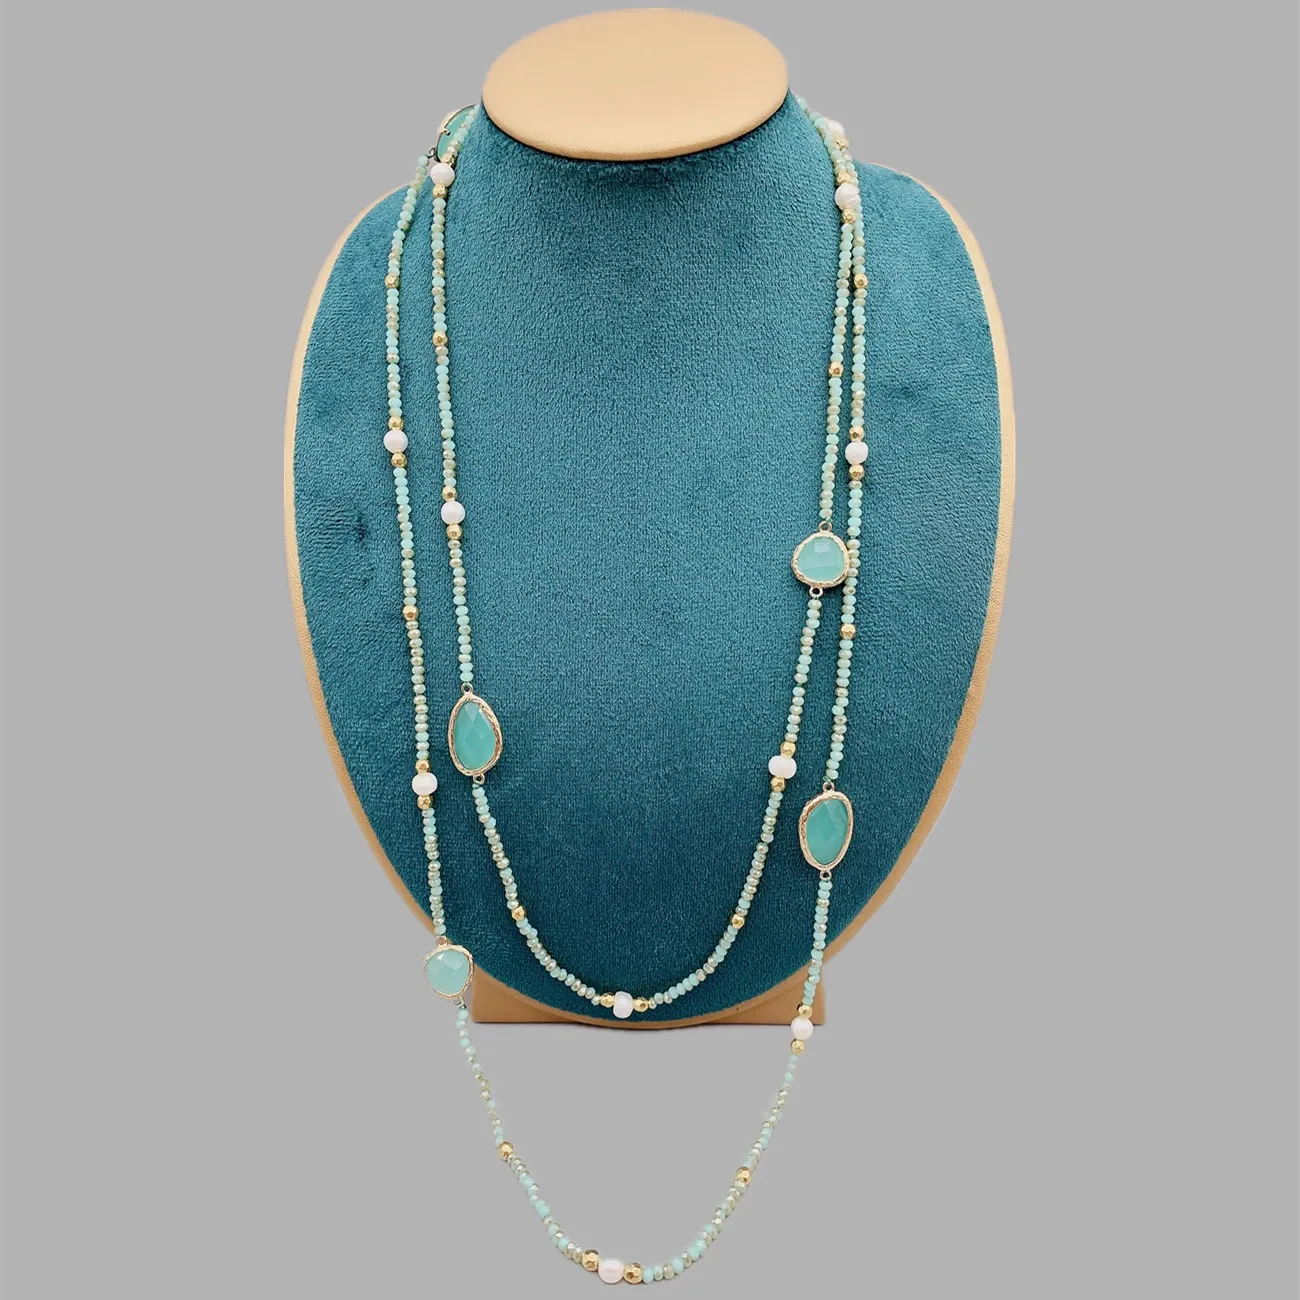 Faceted Cut Irregular Aqua Quartz Long Necklace With 5-6mm White Freshwater Pearls 2mm Crystals And Hammered Gold Beads 50 Inch 231222